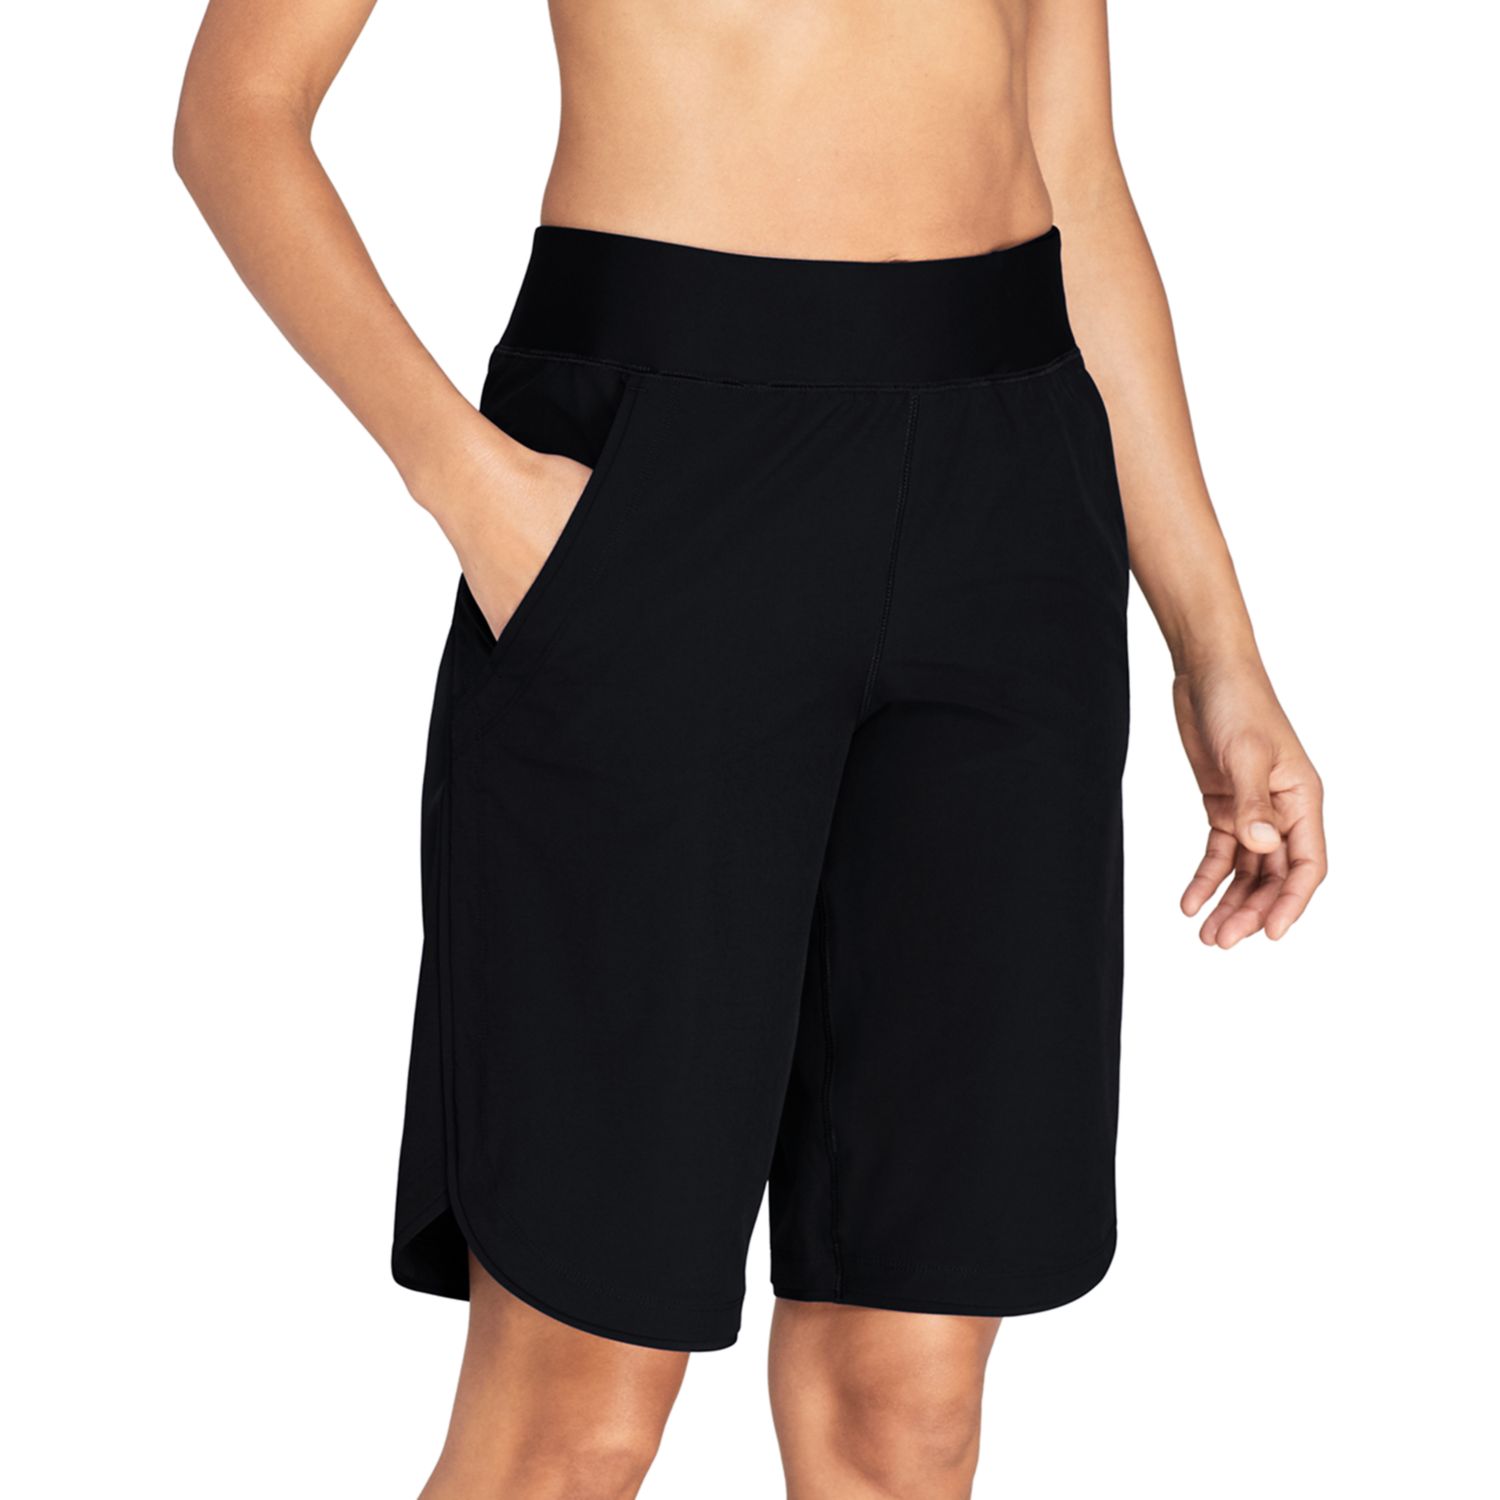 Image for Lands' End Women's Quick Dry Thigh-Minimizer With Panty Swim Modest Board Shorts at Kohl's.